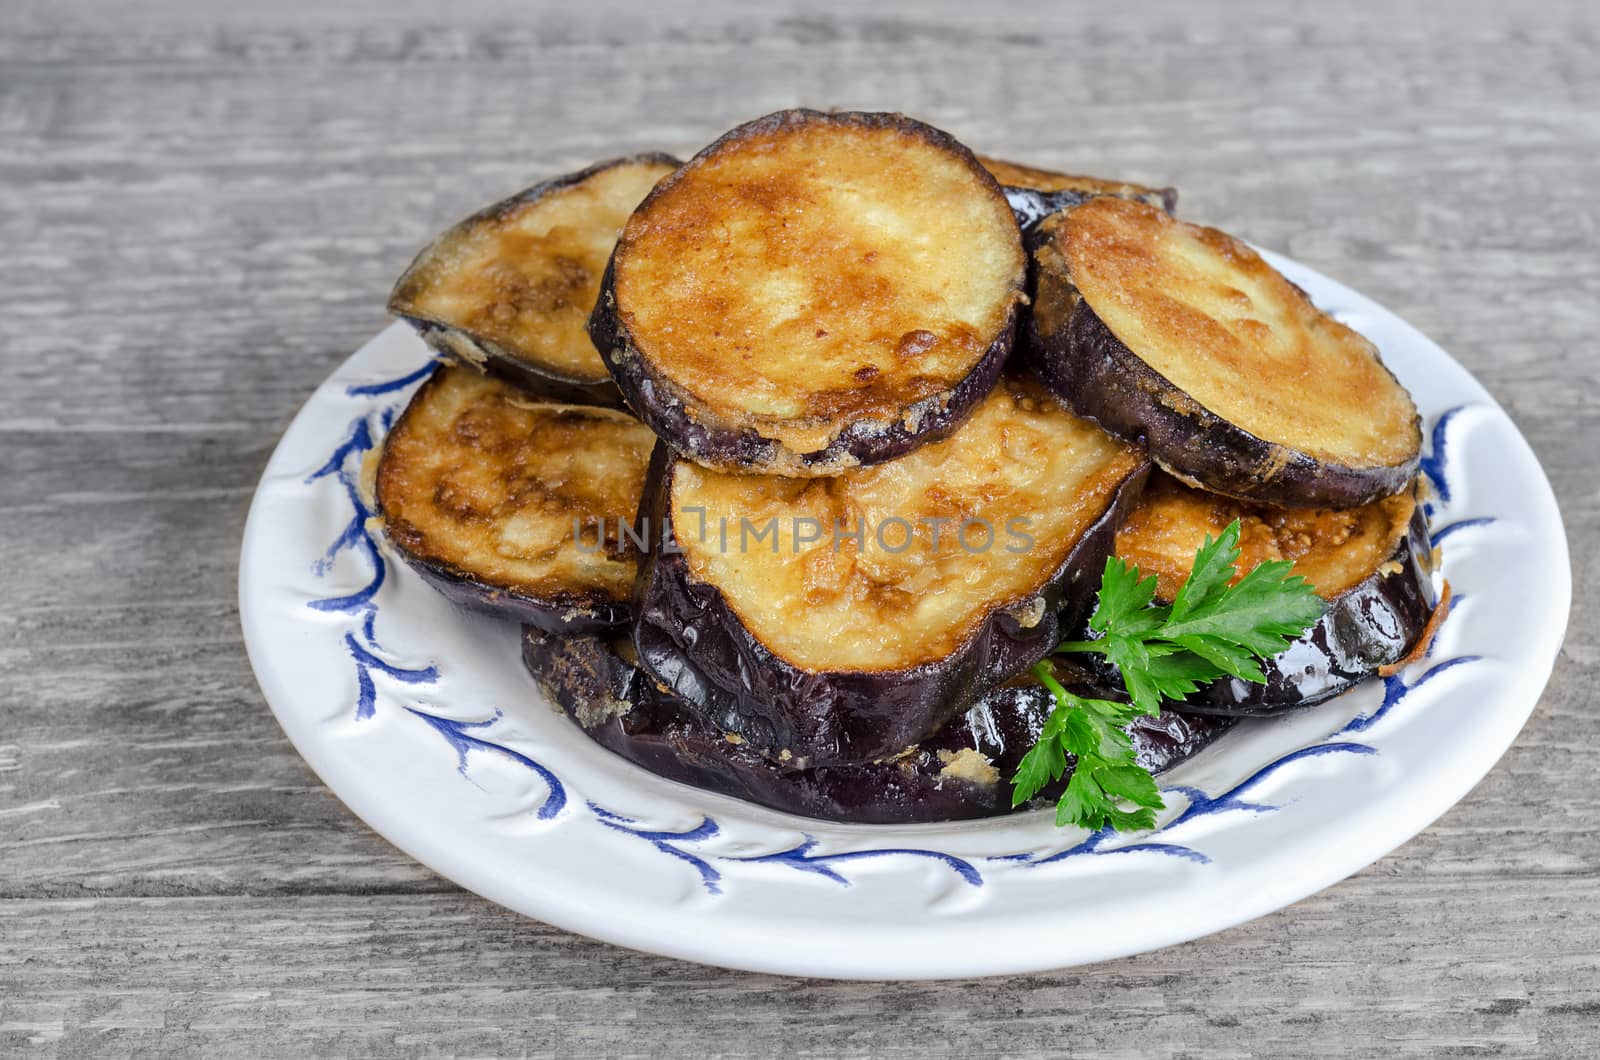 Fried eggplant on a plate and gray wood background, rustic